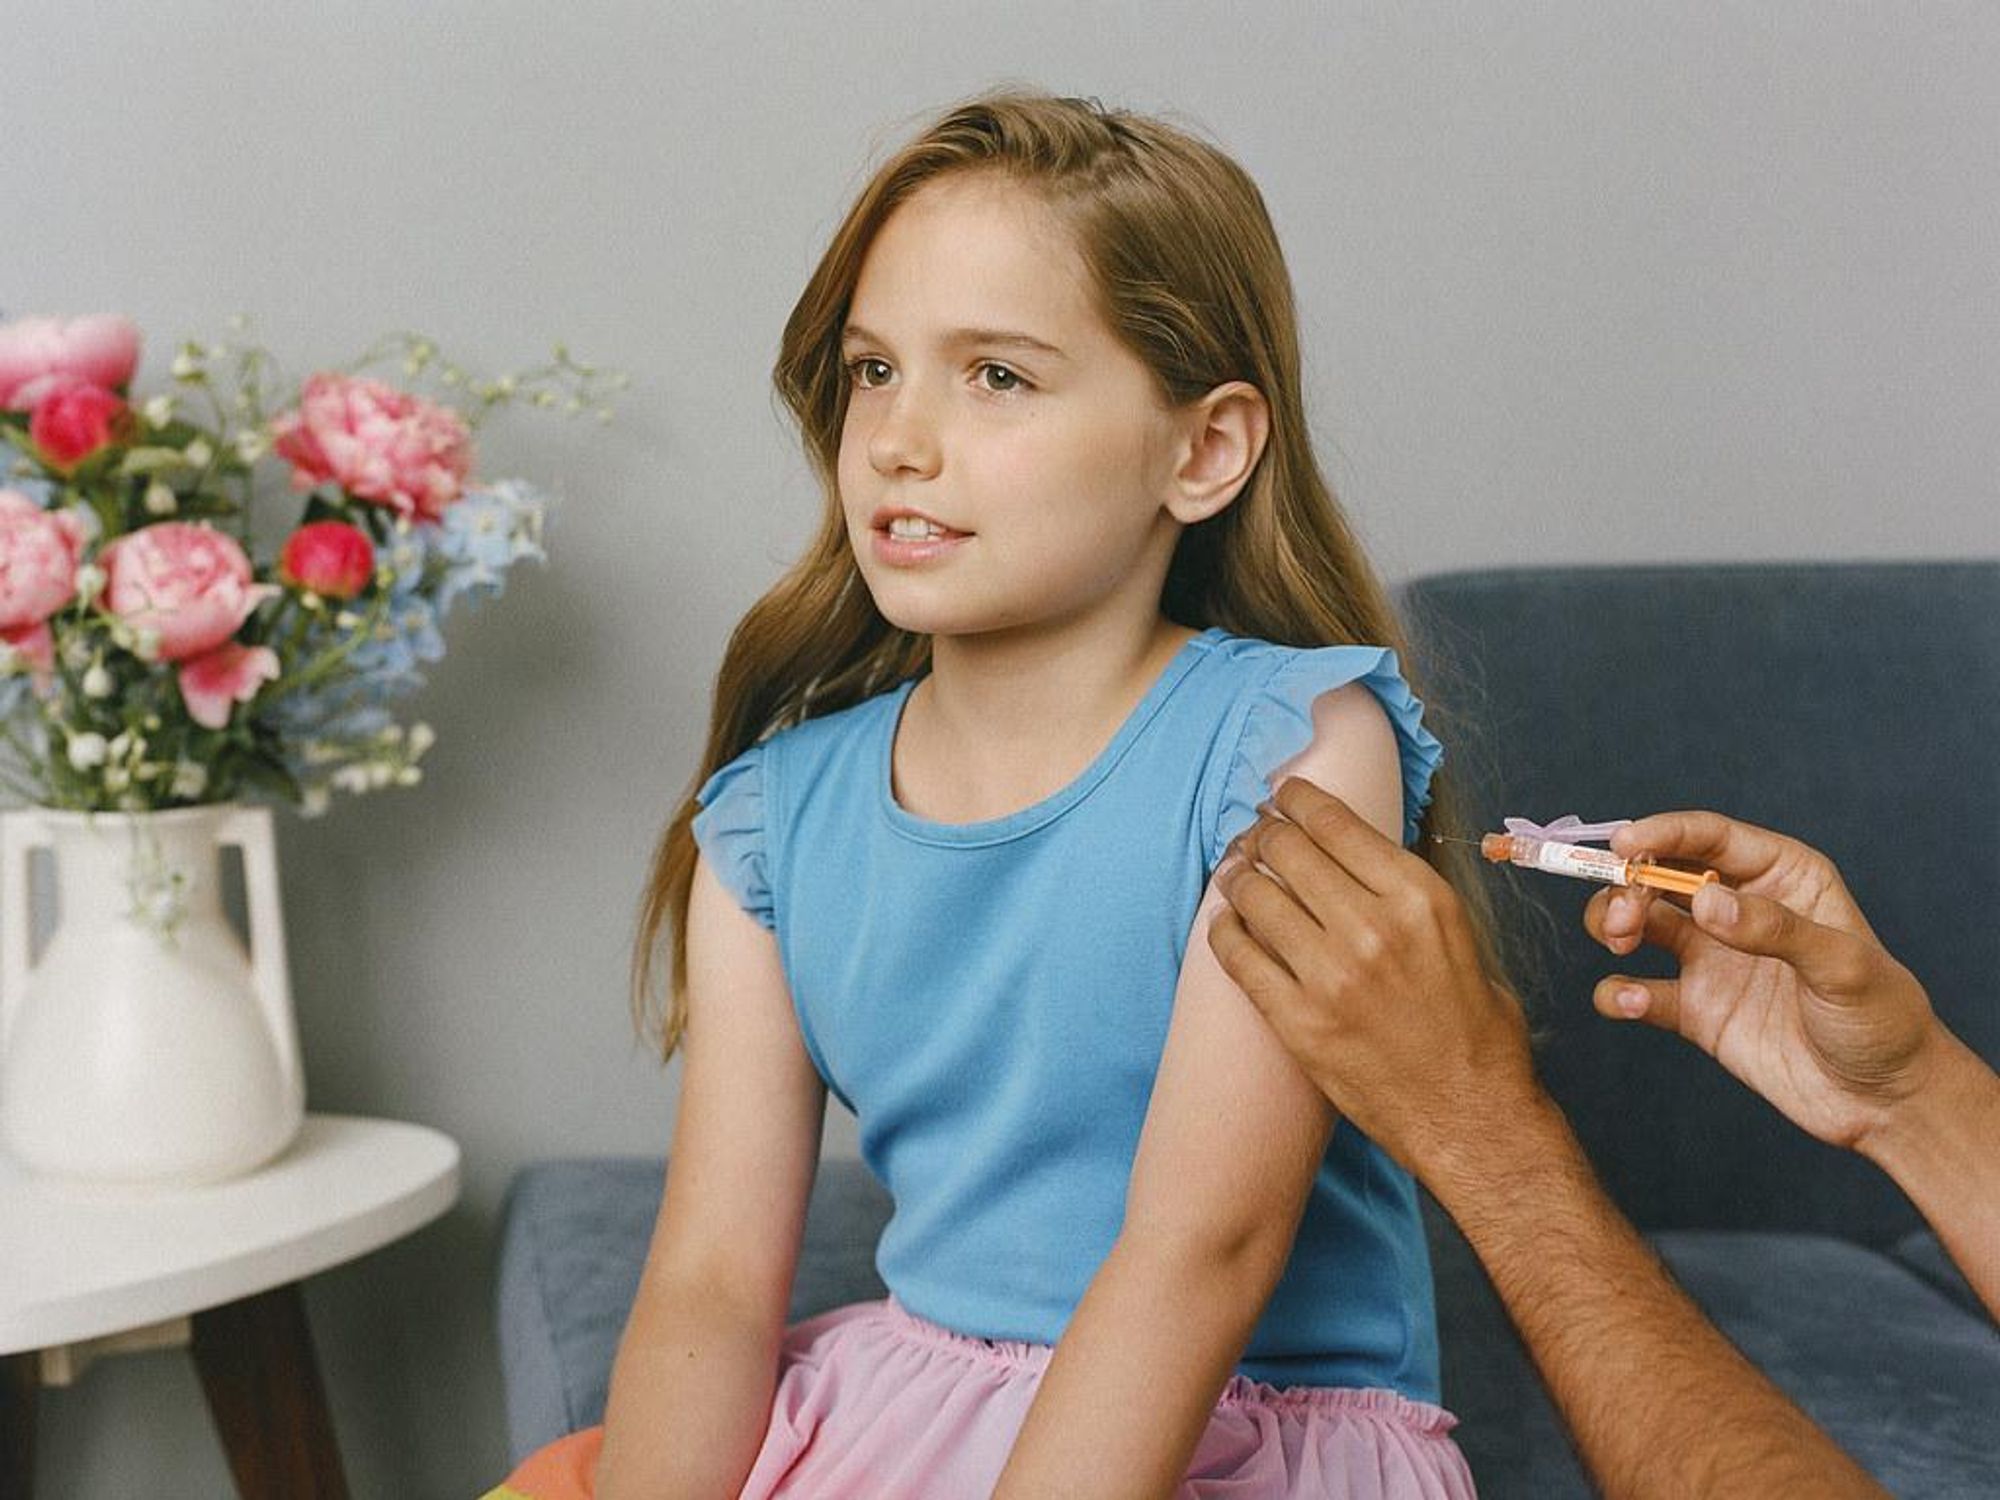 Mass Vaccination of 5-11 Year Olds Will Look Much Different for LA County